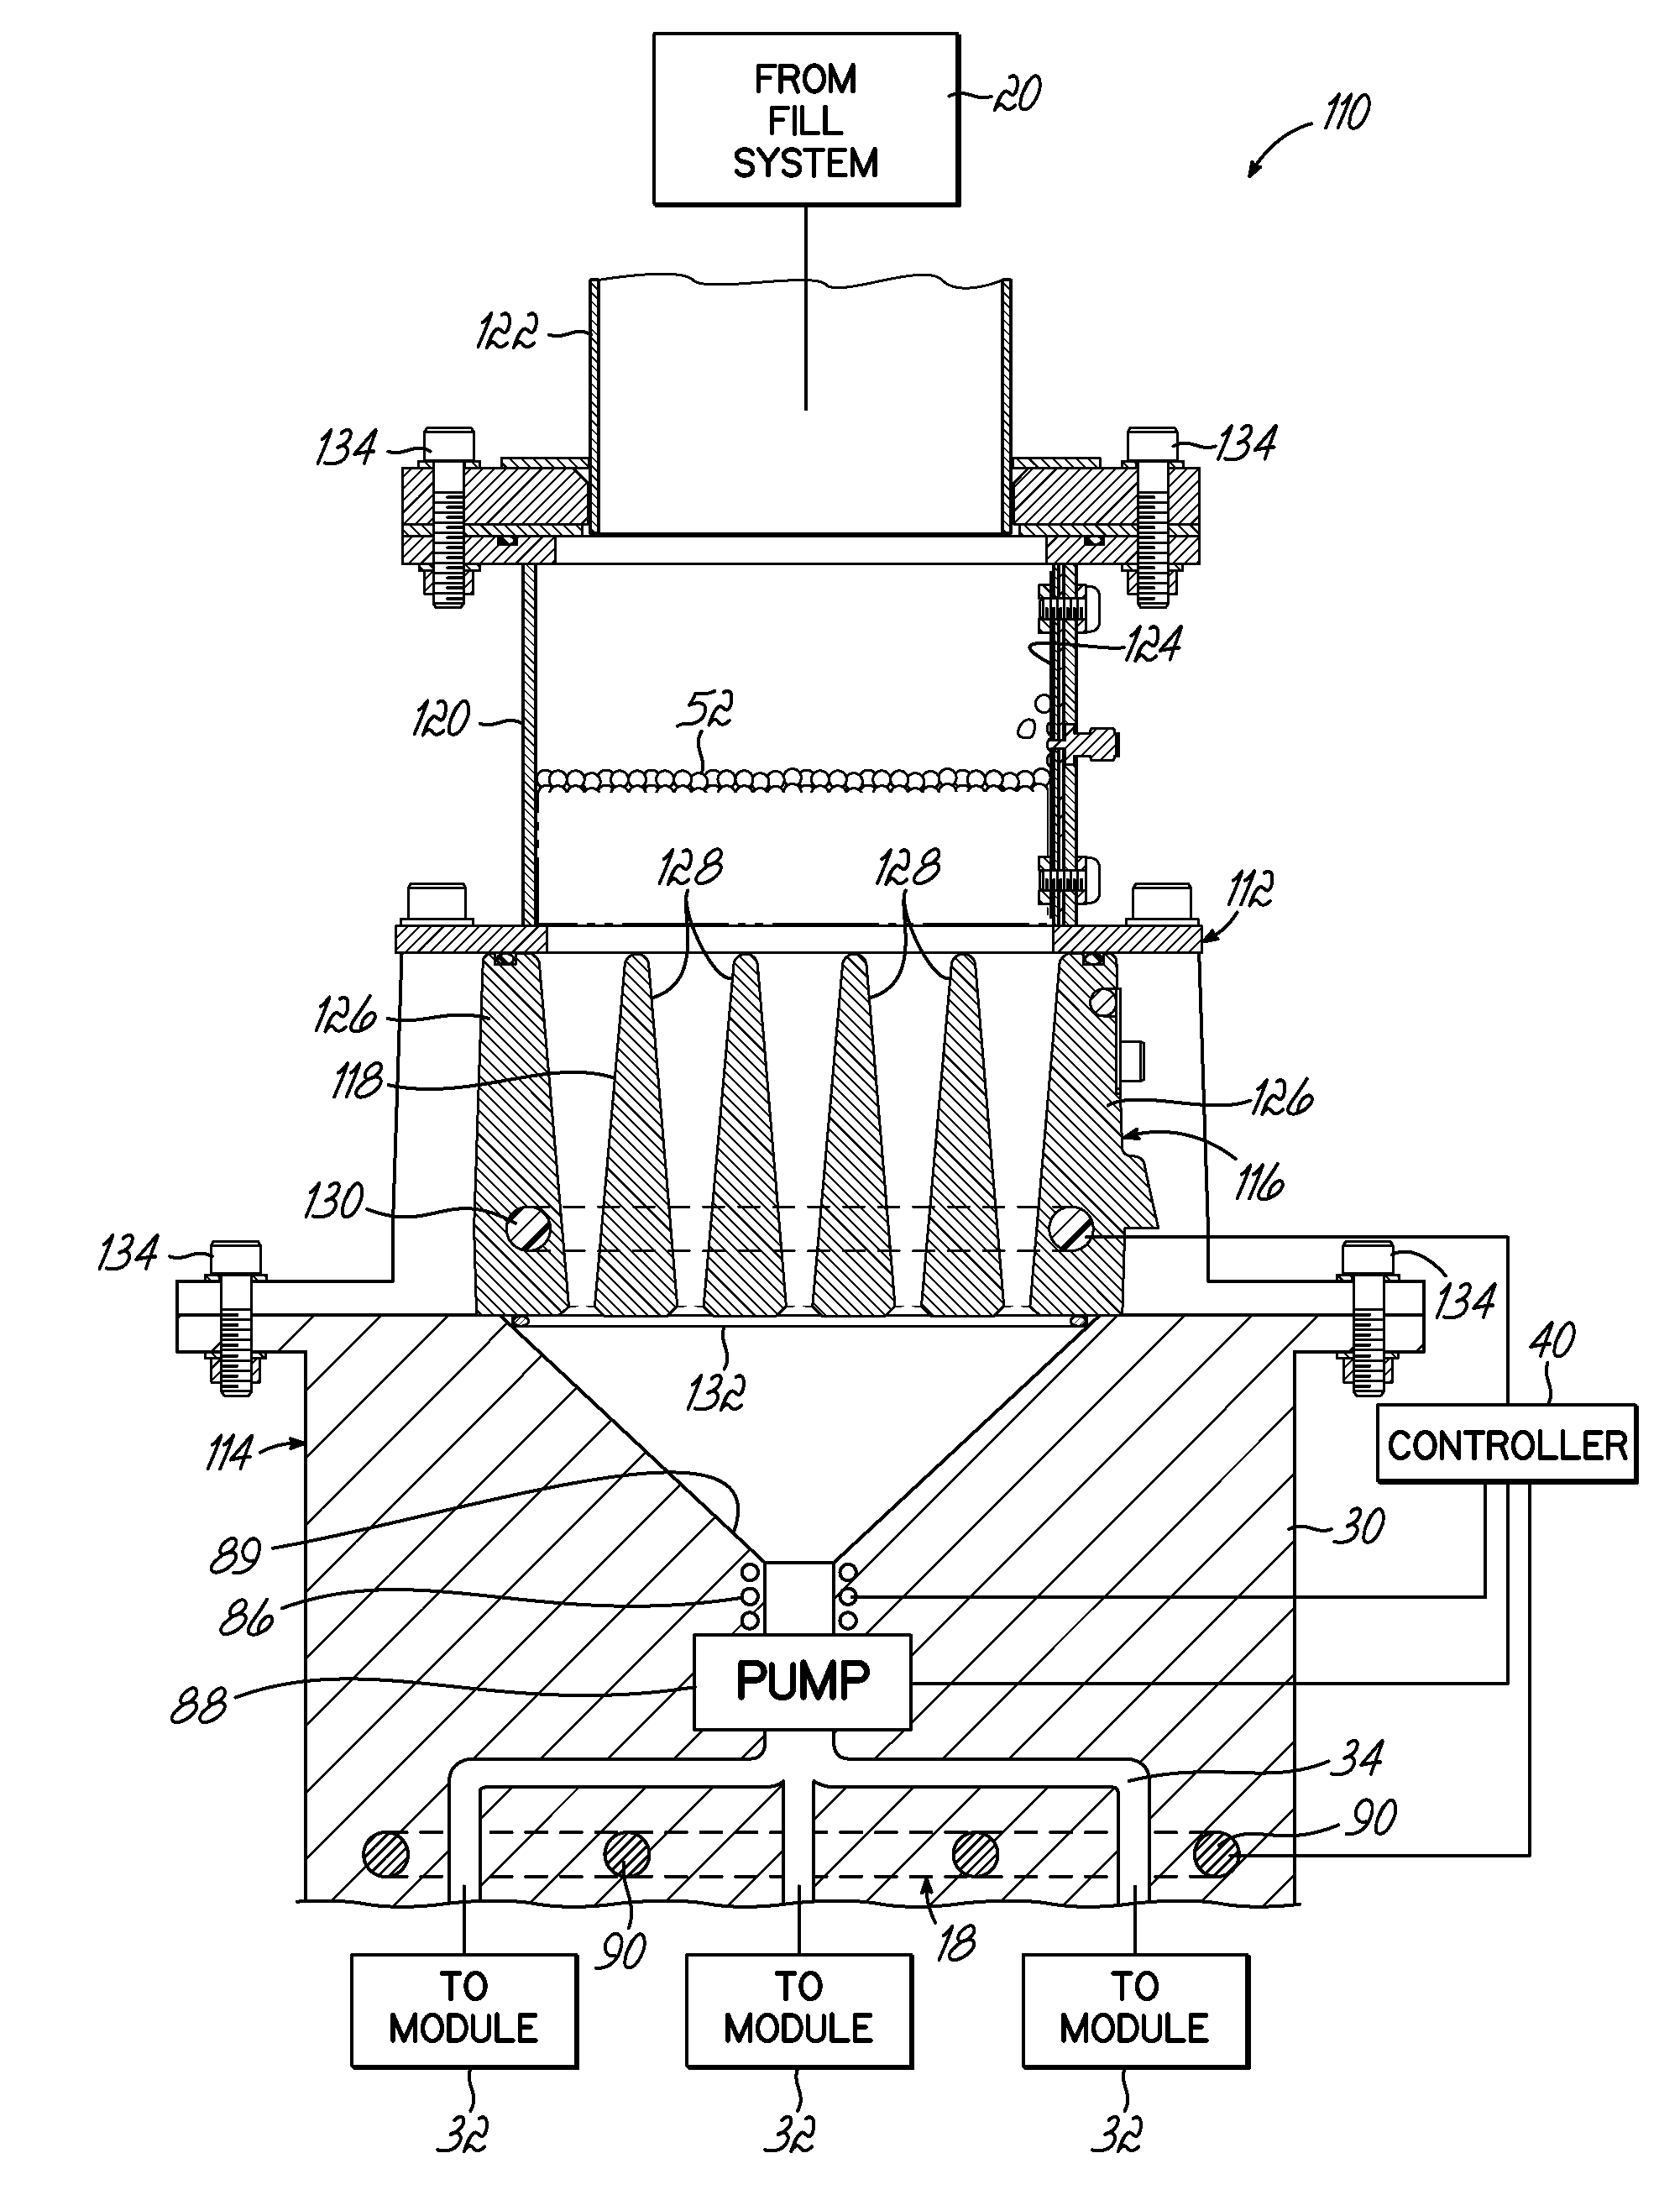 Adhesive dispensing system and method with melt on demand at point of dispensing